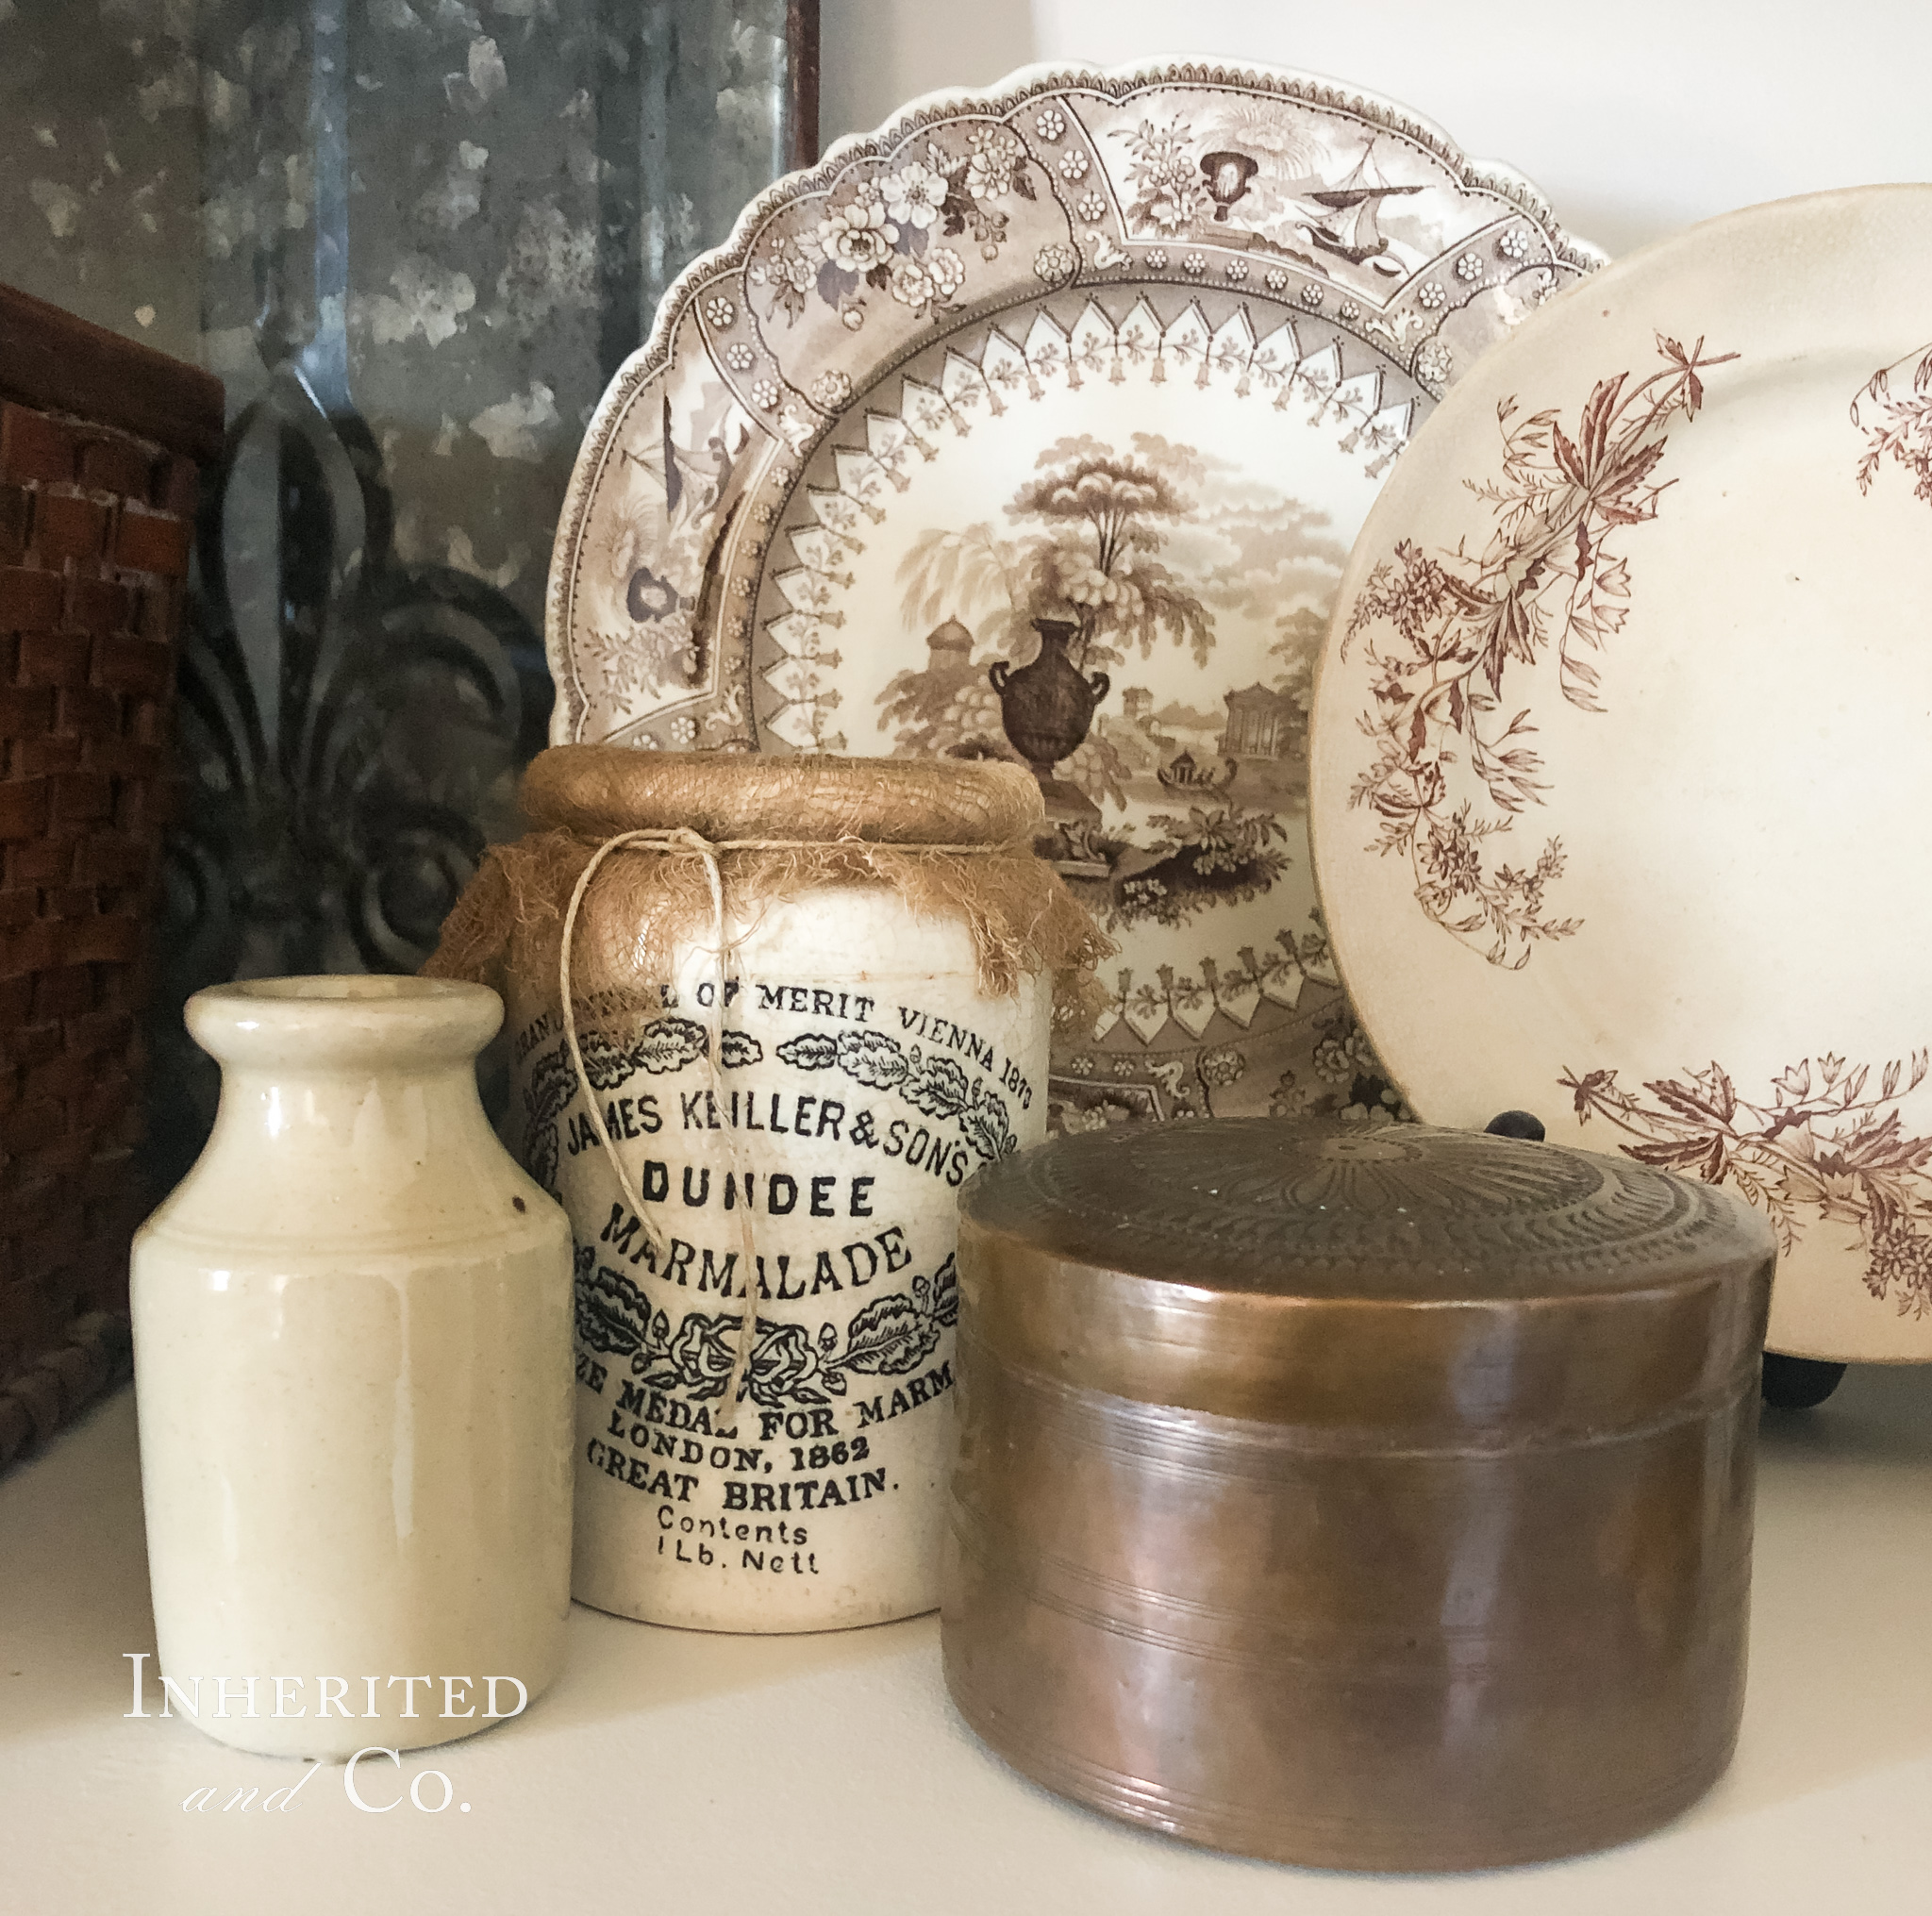 An antique stoneware ink bottle, Dundee marmalade jar, and round copper lidded box in the foreground with two antique brown transferware plates in the background